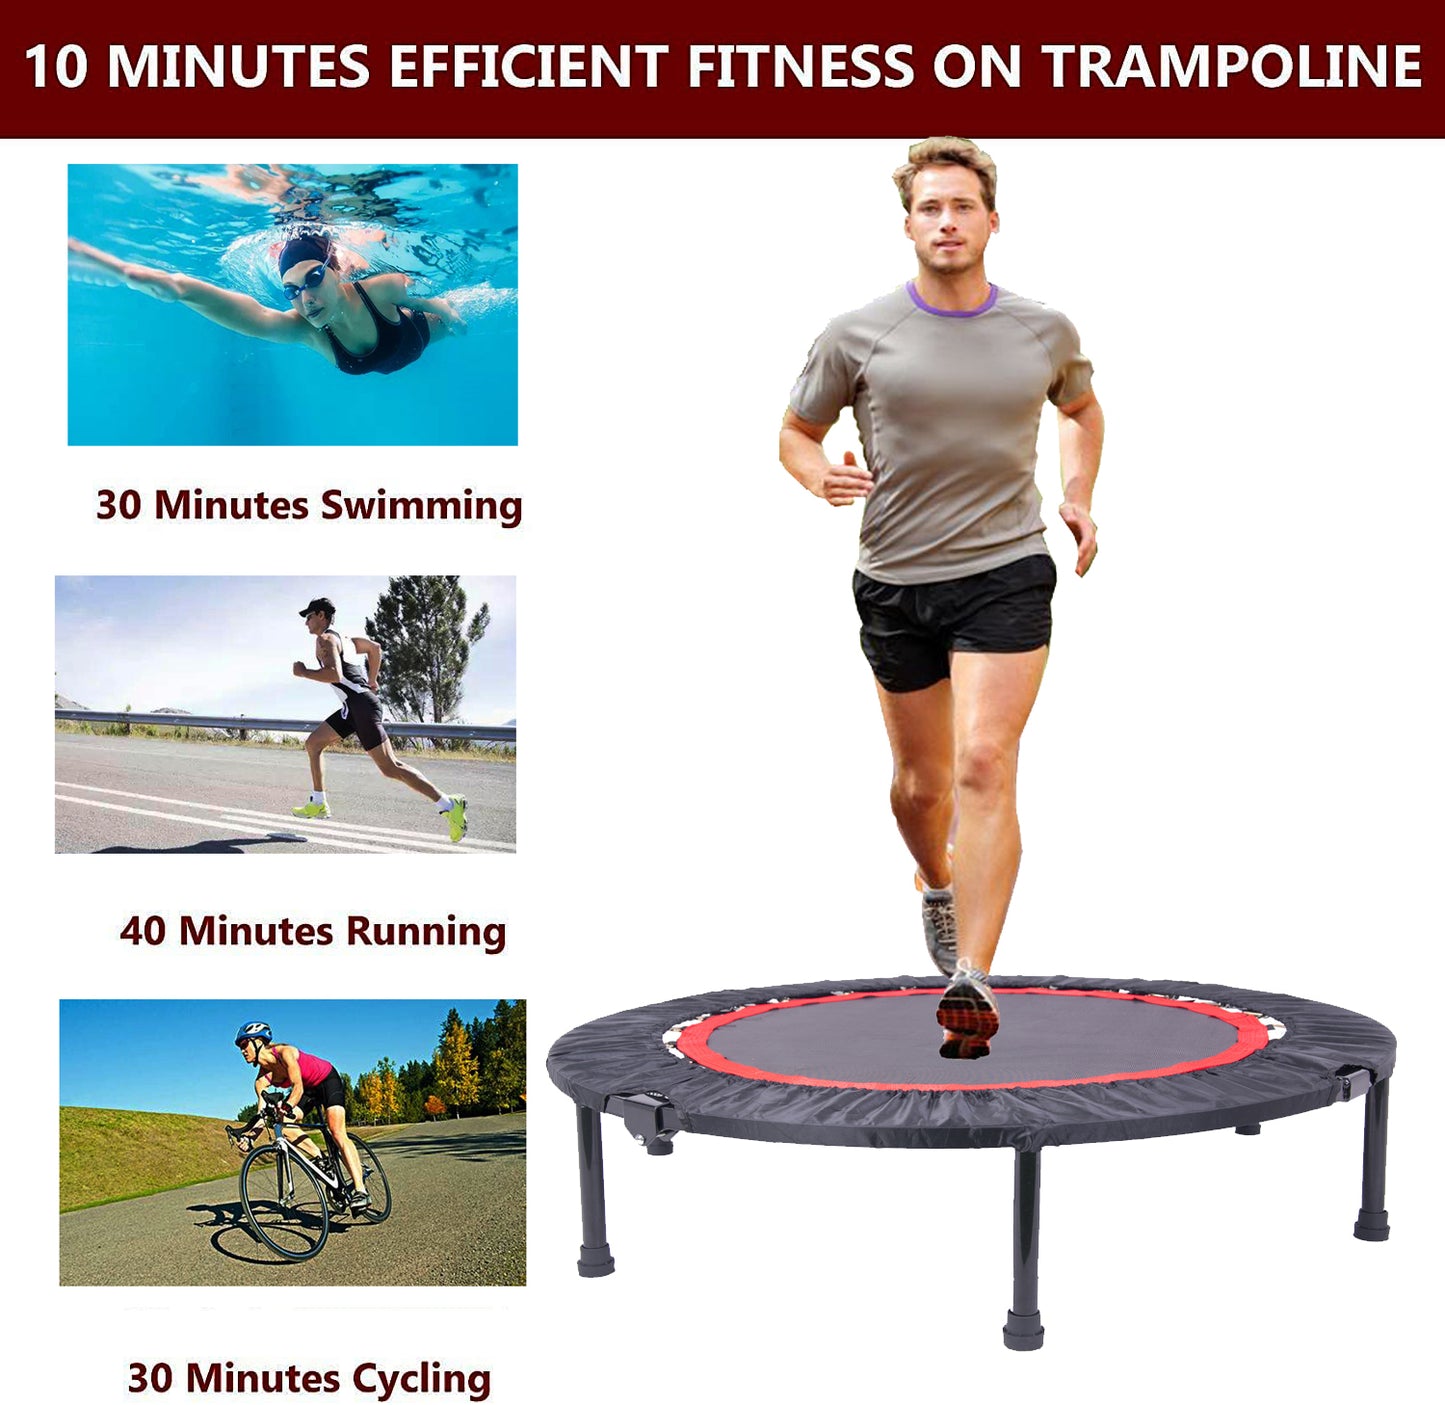 40 Inch Mini Exercise Trampoline for Adults or Kids - Indoor Fitness Rebounder Trampoline with Safety Pad Max